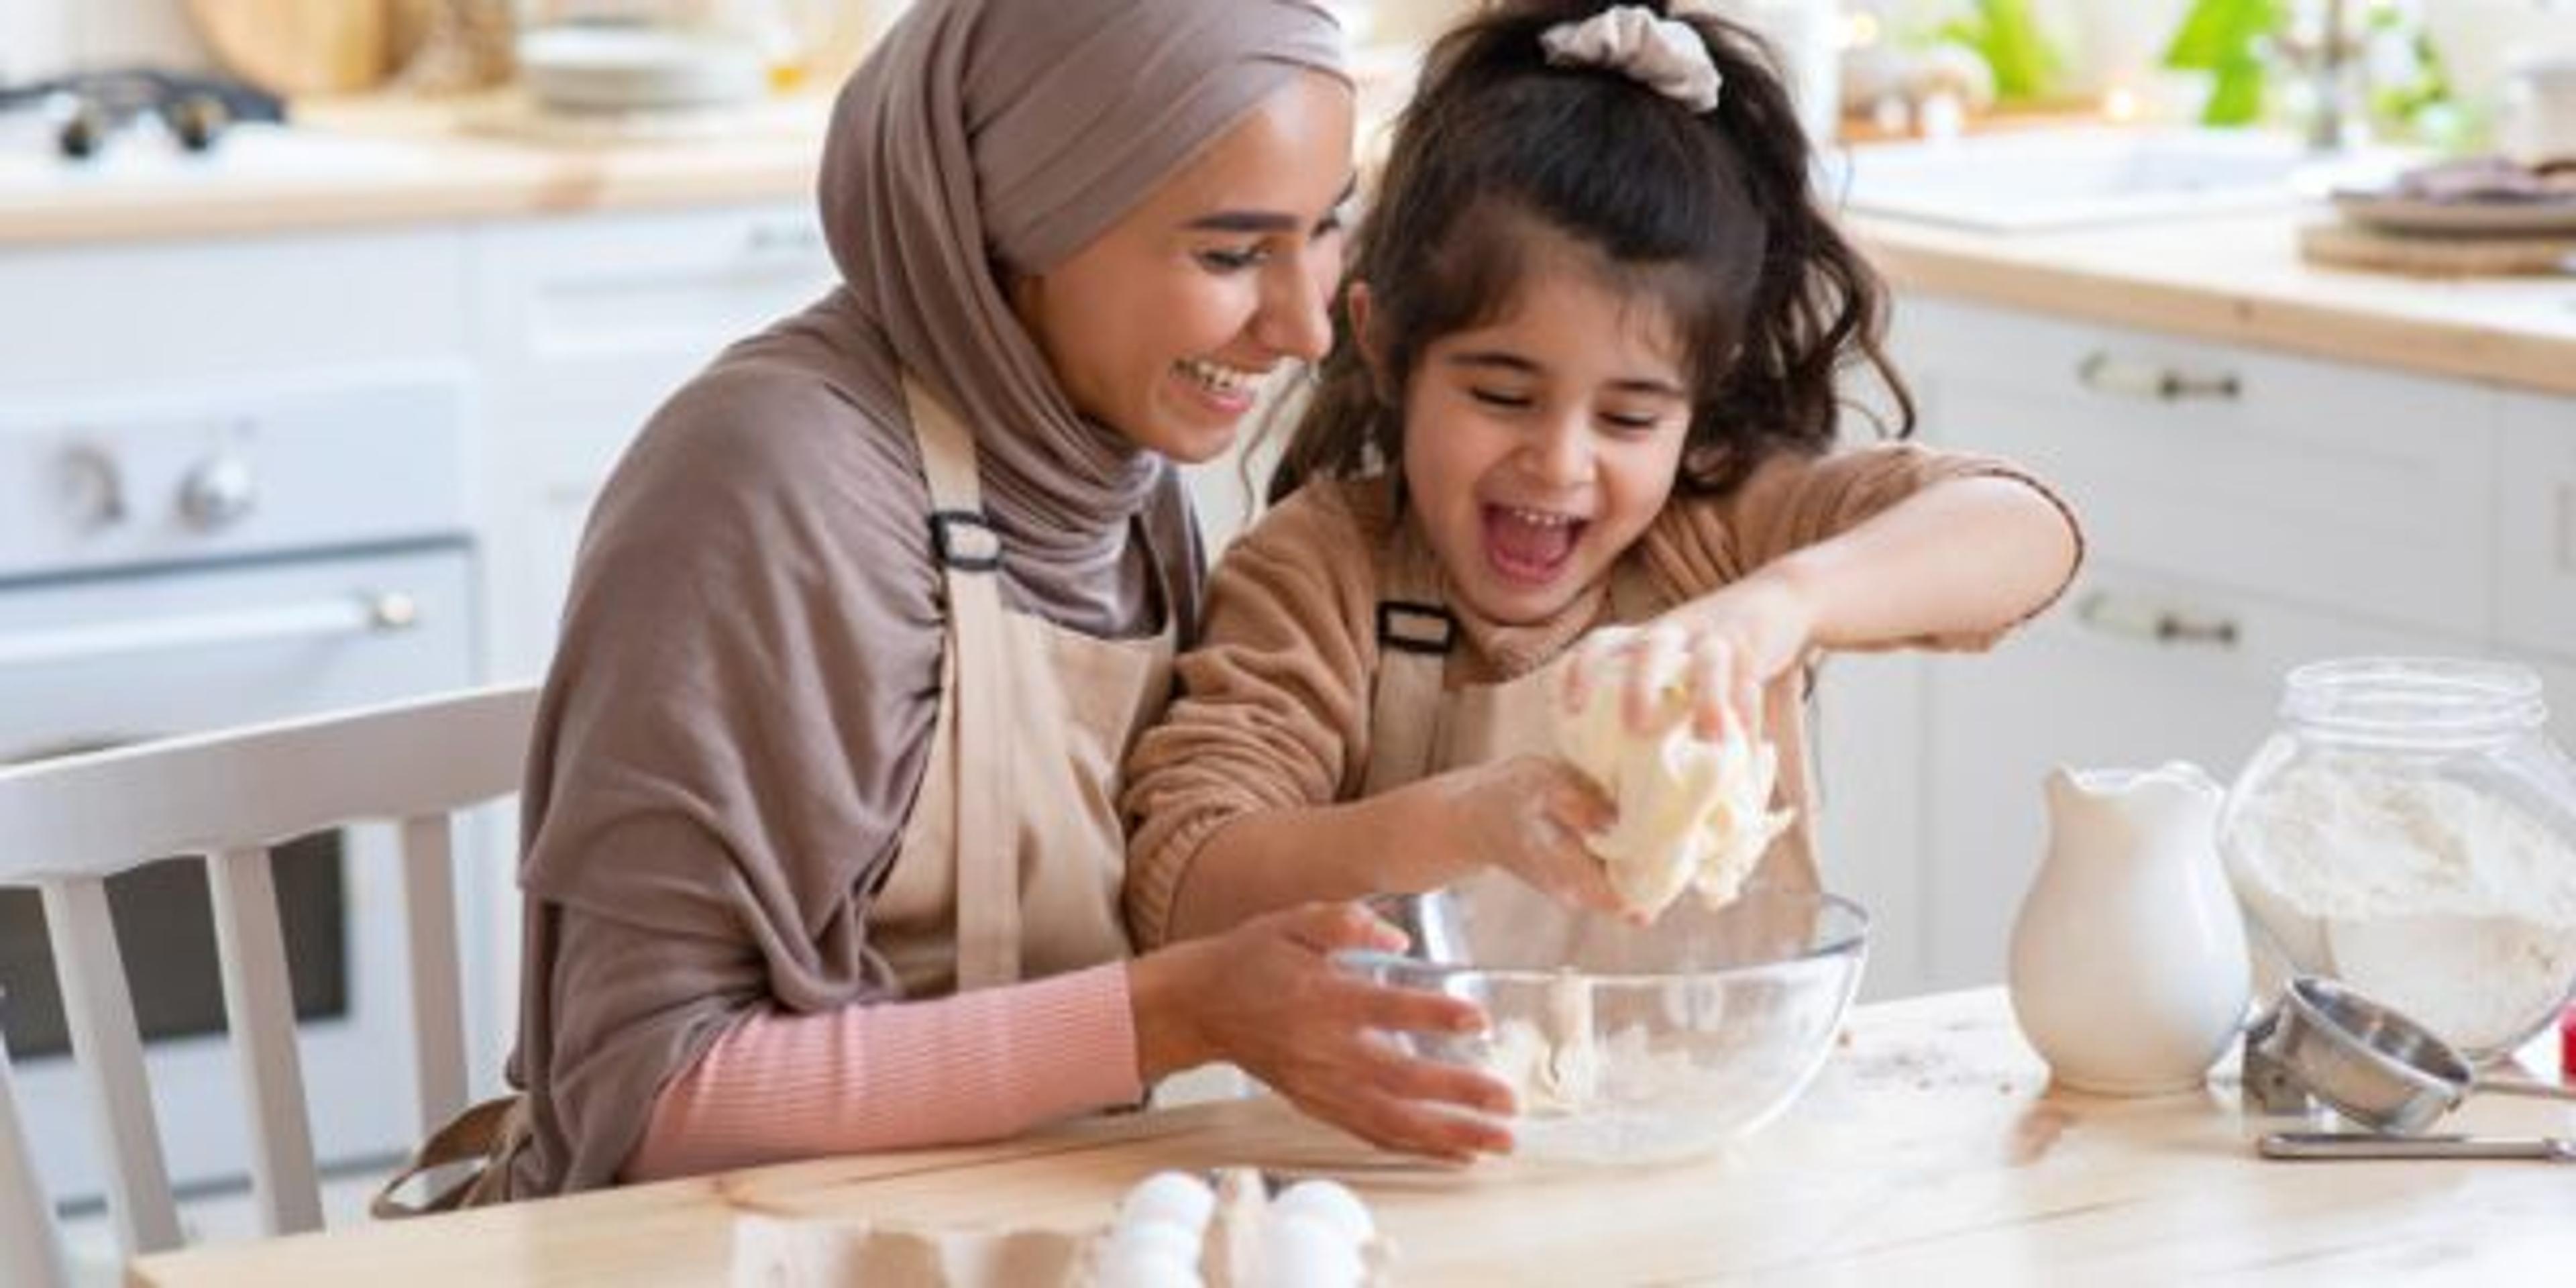 A Muslim mom and daughter have fun baking together in their kitchen.